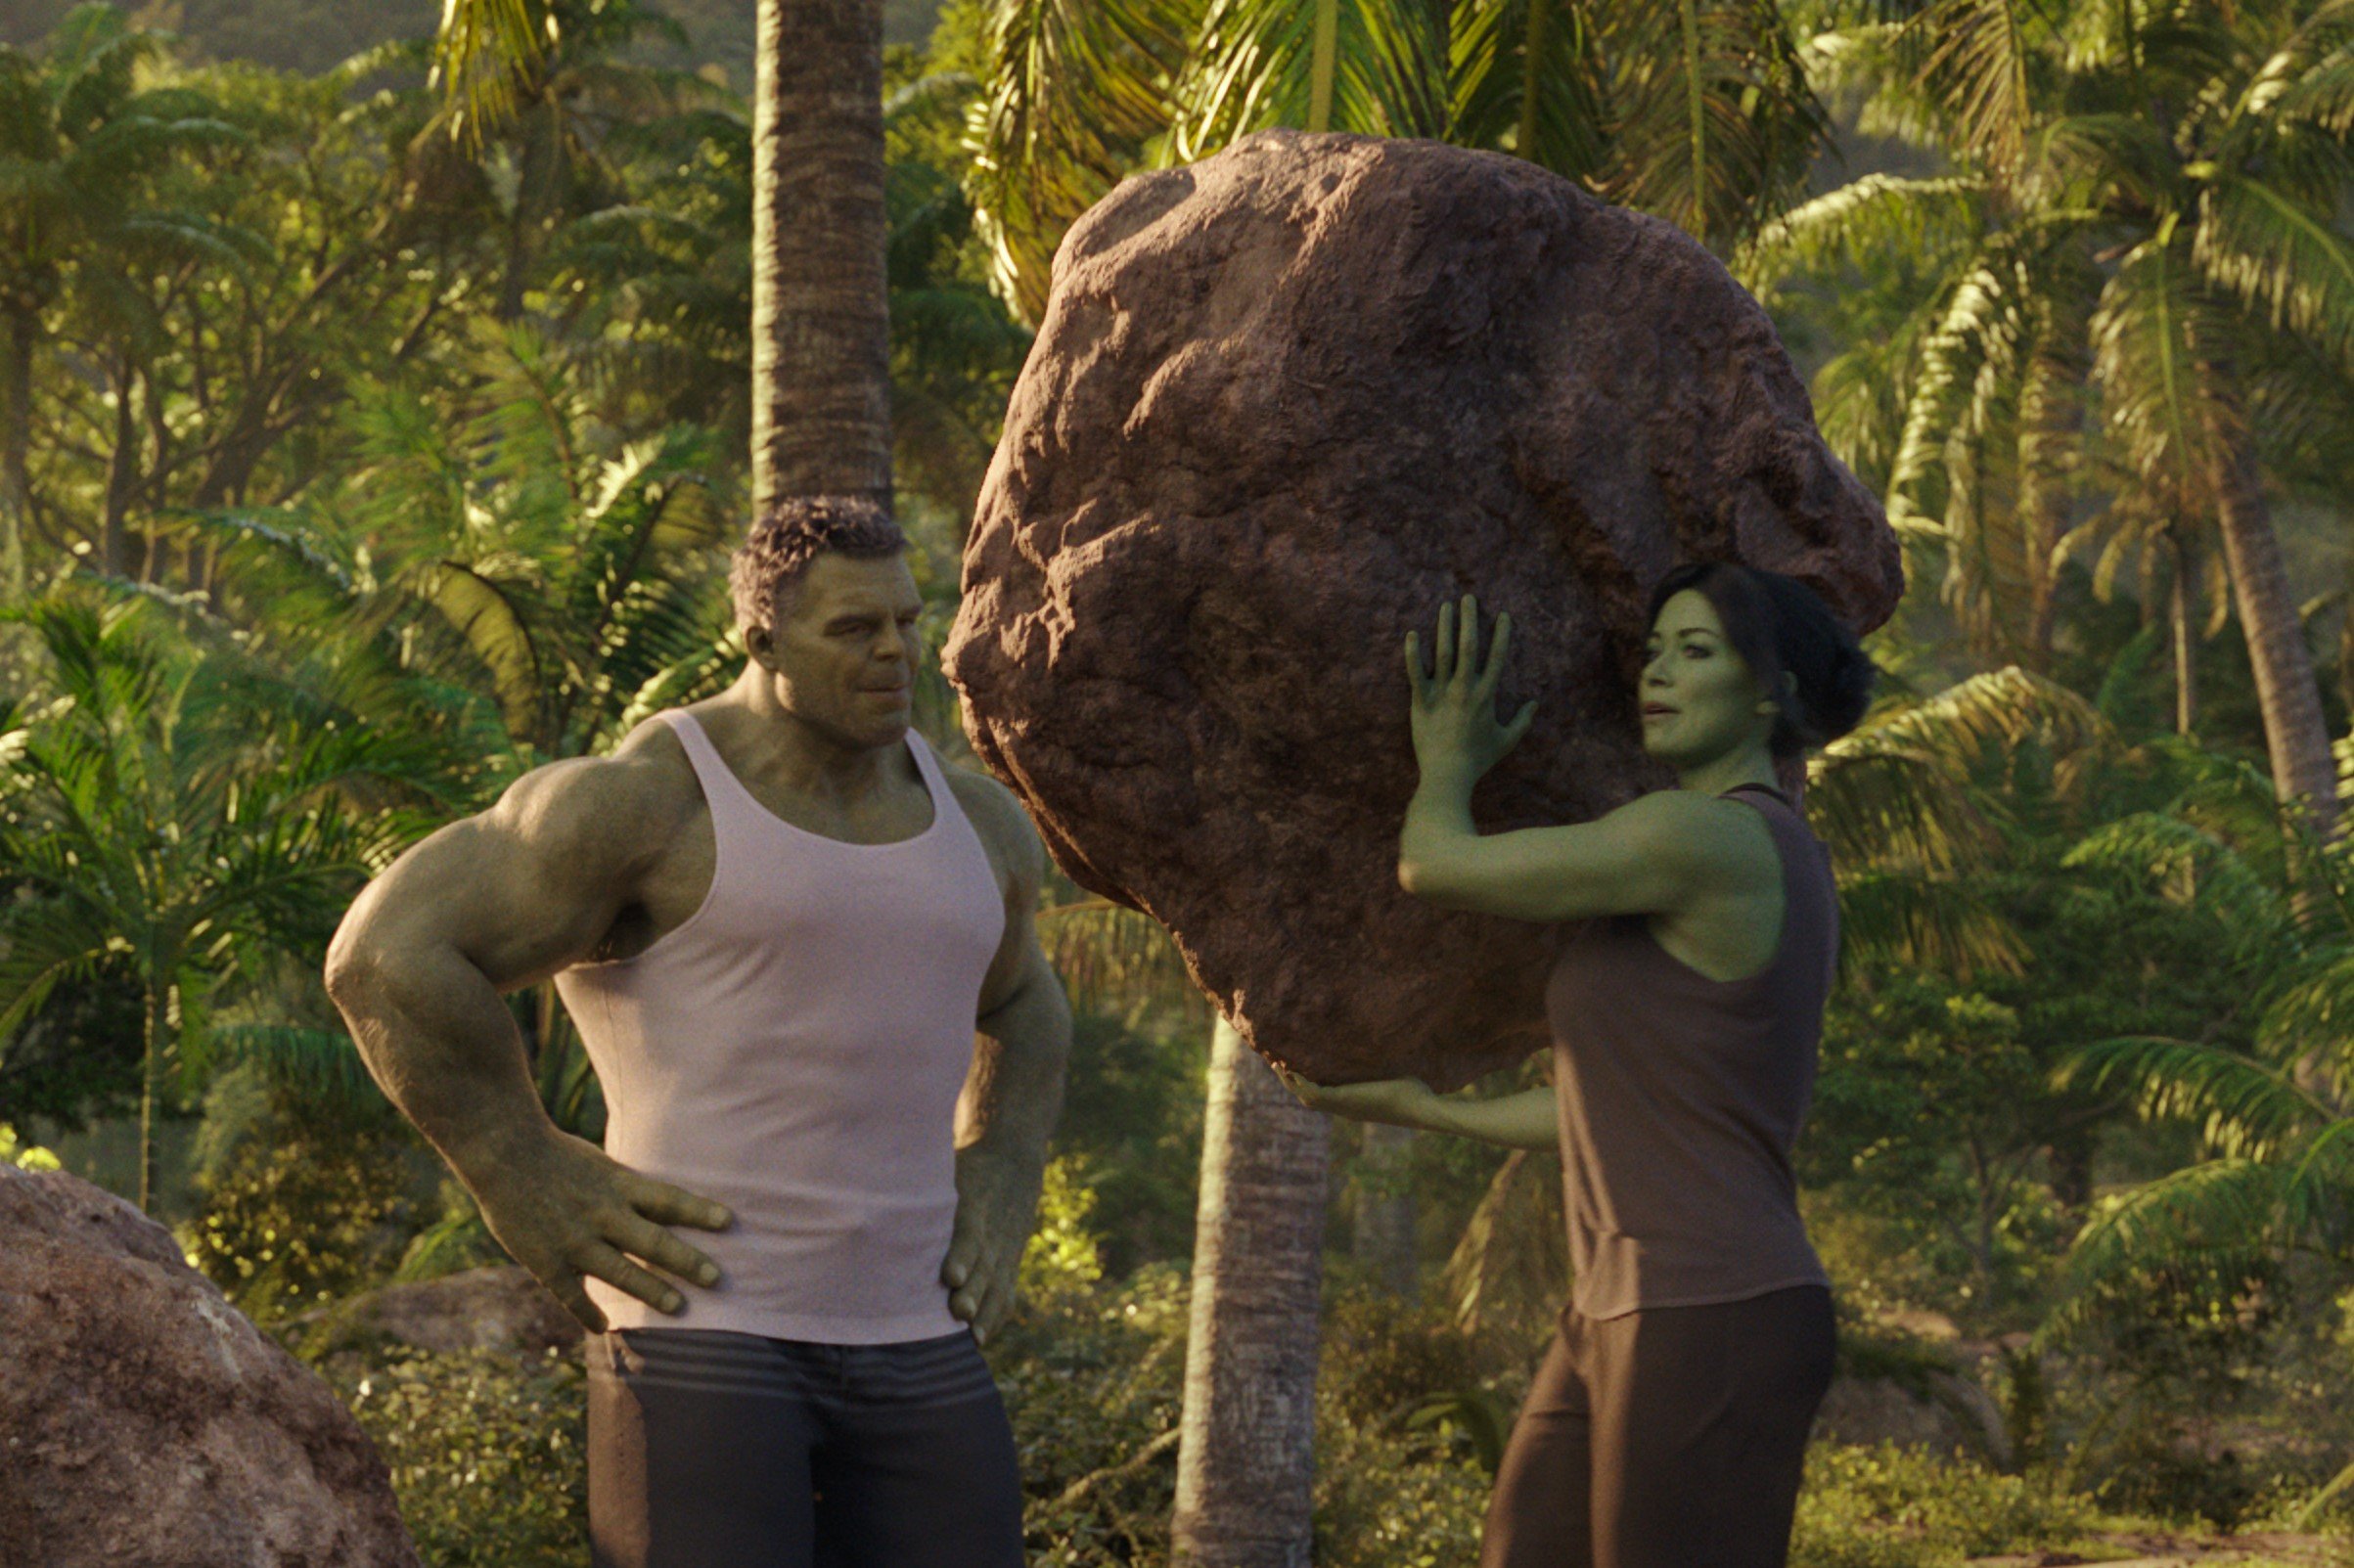 ‘She-Hulk’: Will Every Episode Have a Post-Credits Scene?